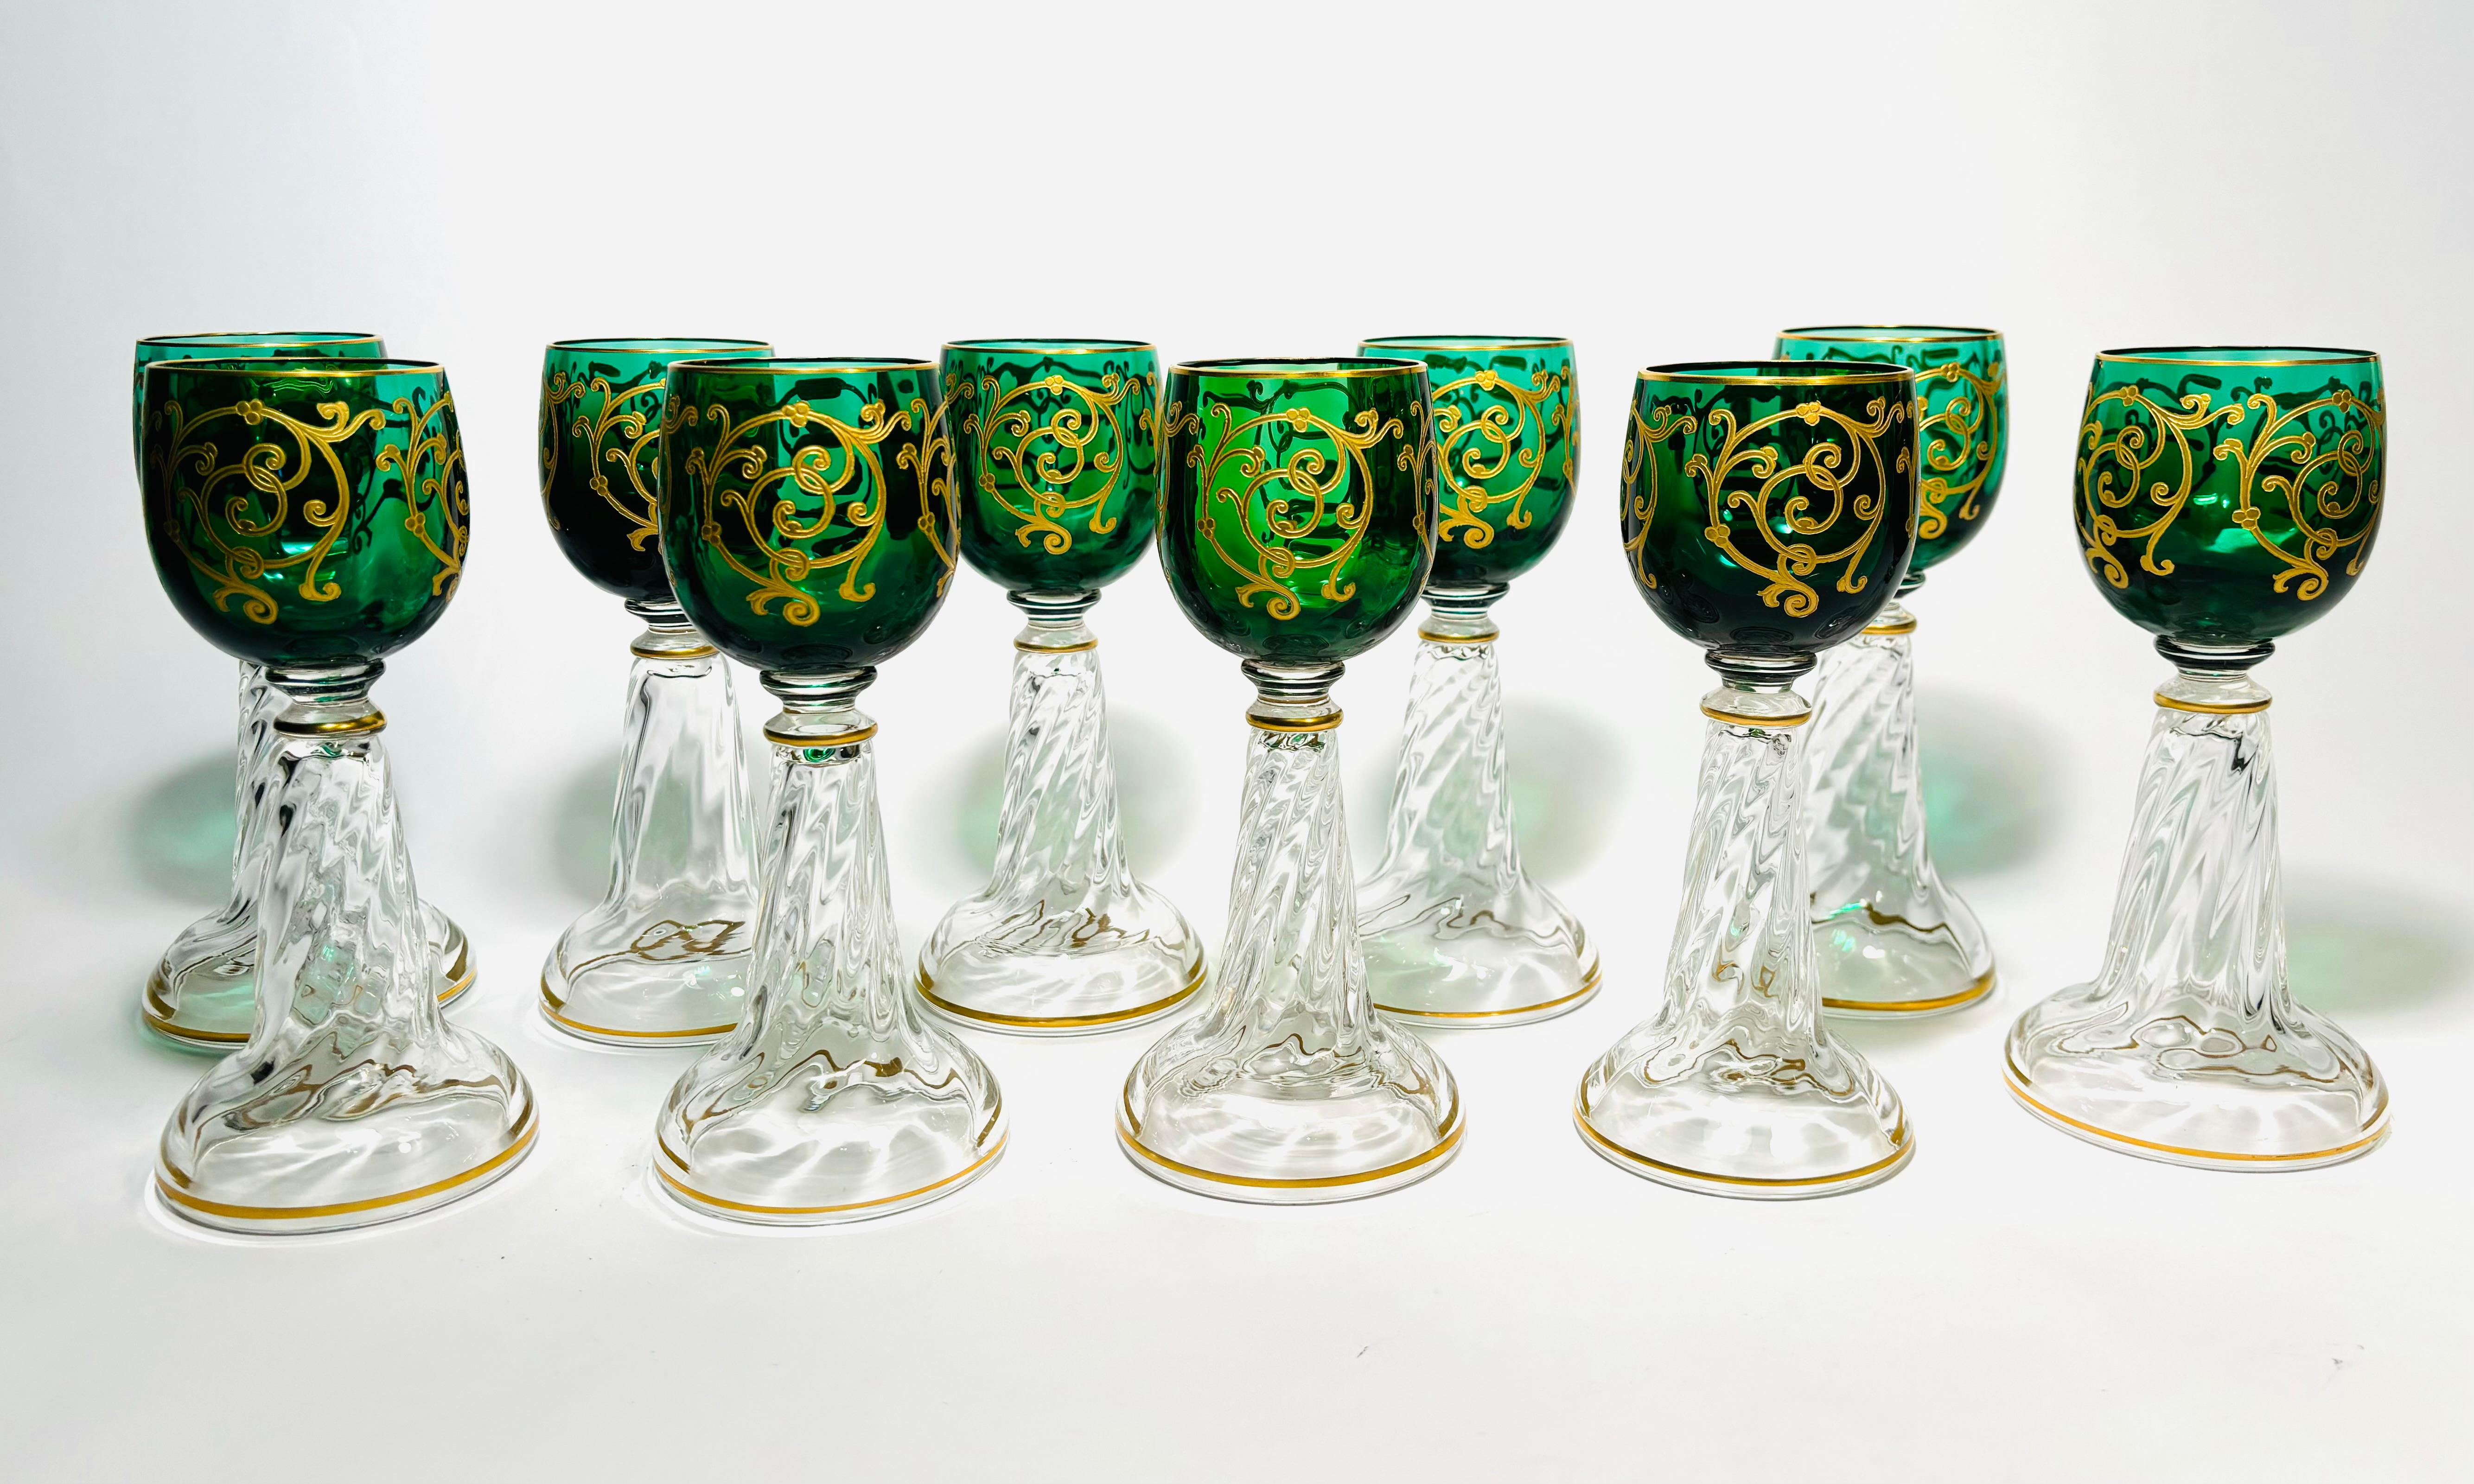 Ten Antique French Green Raised Gold Wine Glasses, circa 1890 For Sale 4